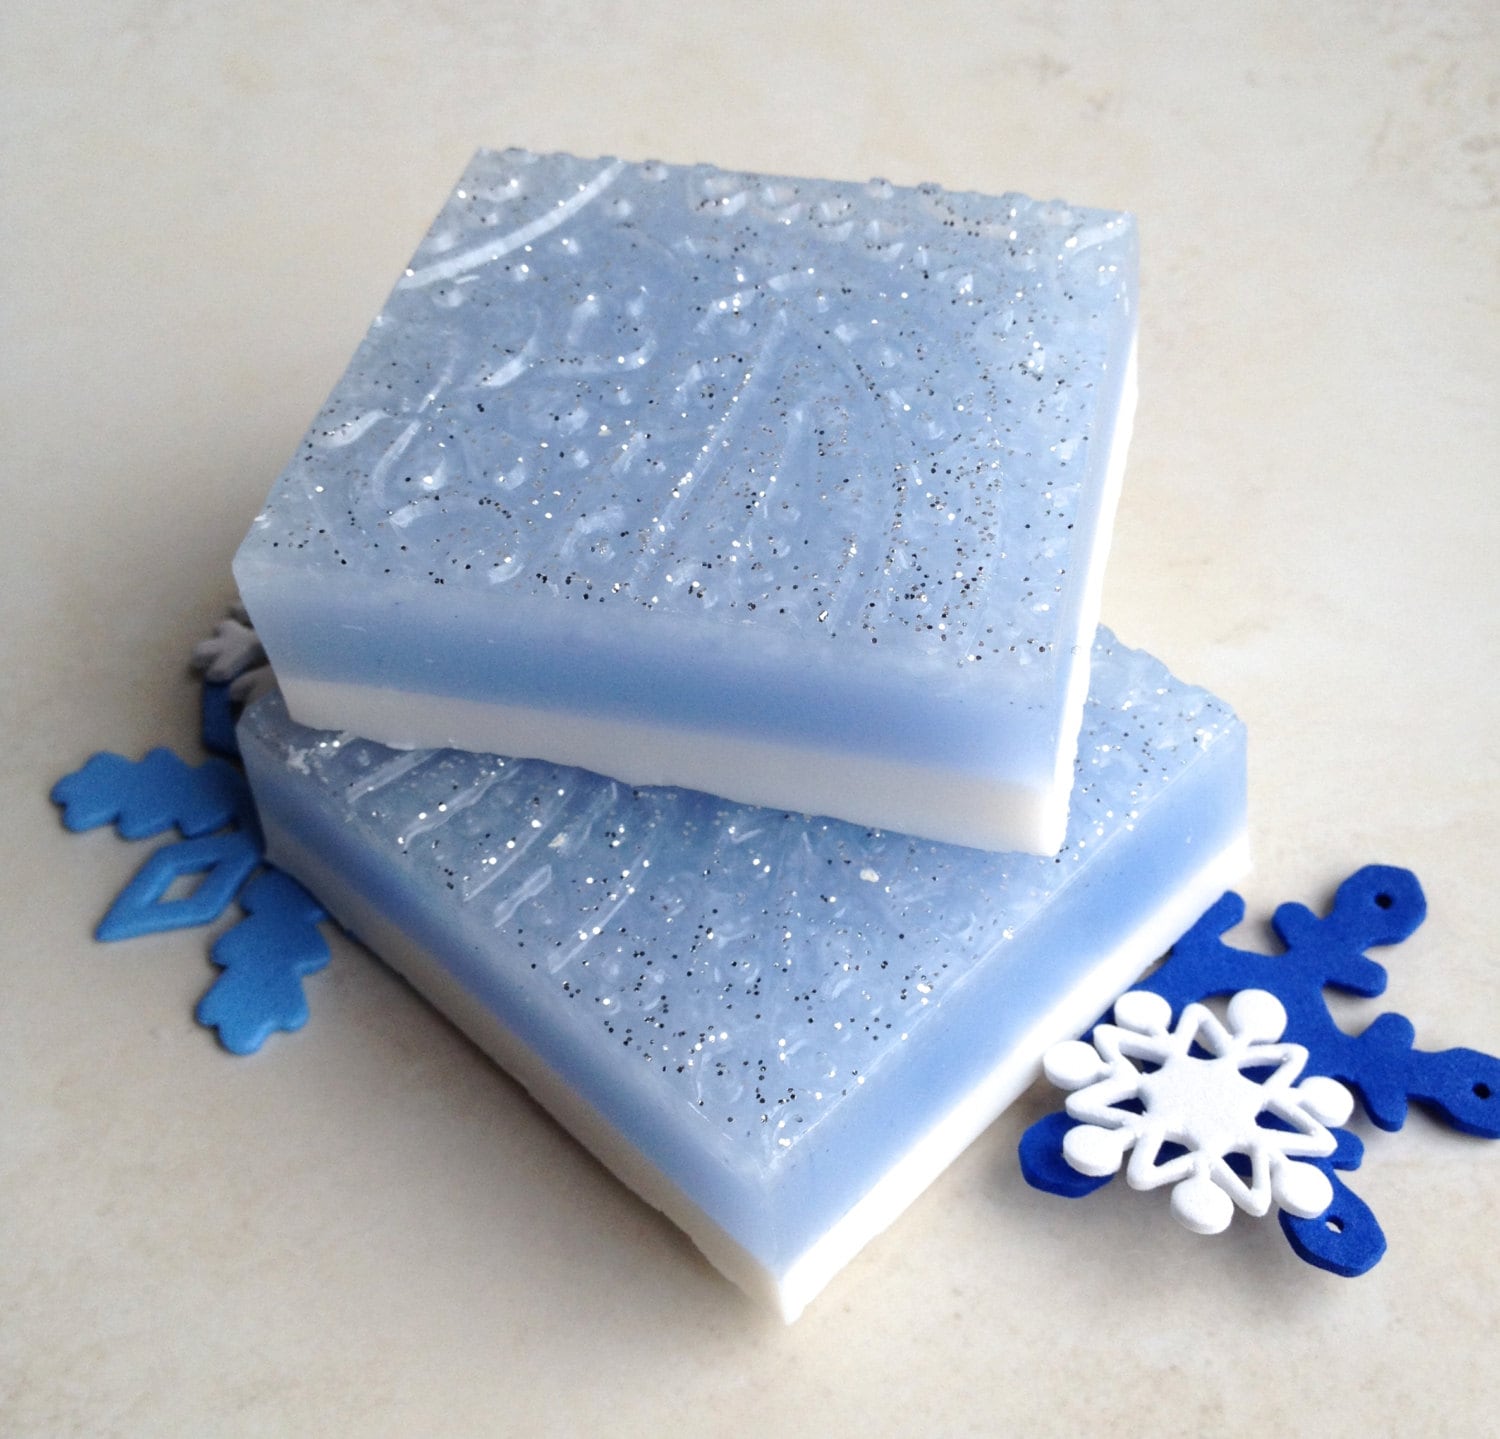 First Frost Winter Soap Bar, Glycerin Soap, Fresh Air, Spring Water Ice, Heliotrope Soap, Holiday Soap, Blue Glitter - LovelyBody